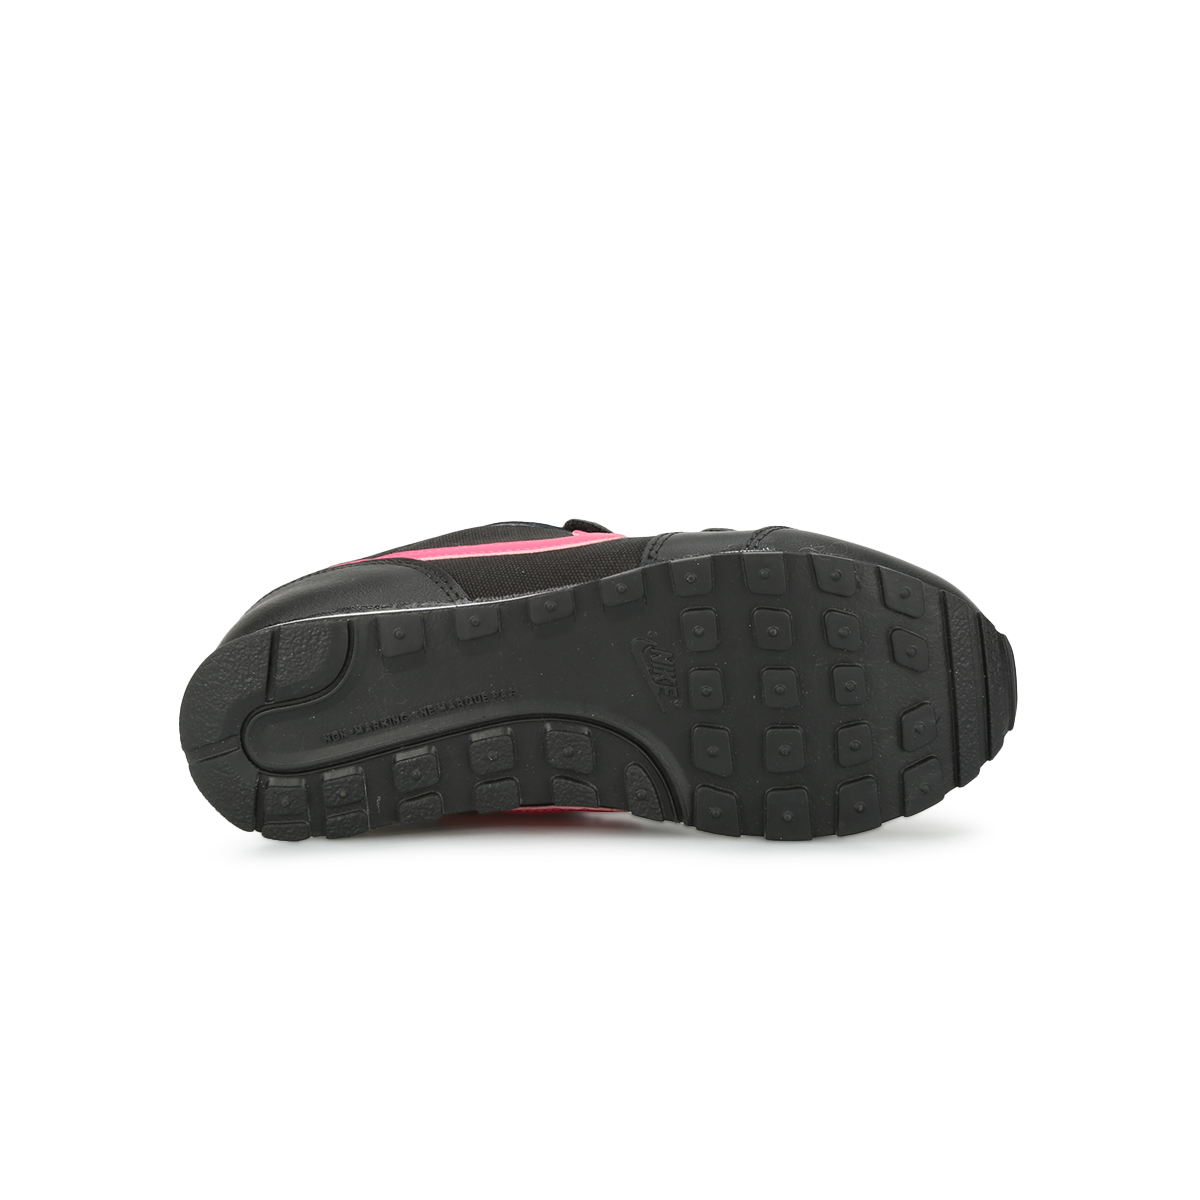 Zapatillas Nike Md Runner 2,  image number null